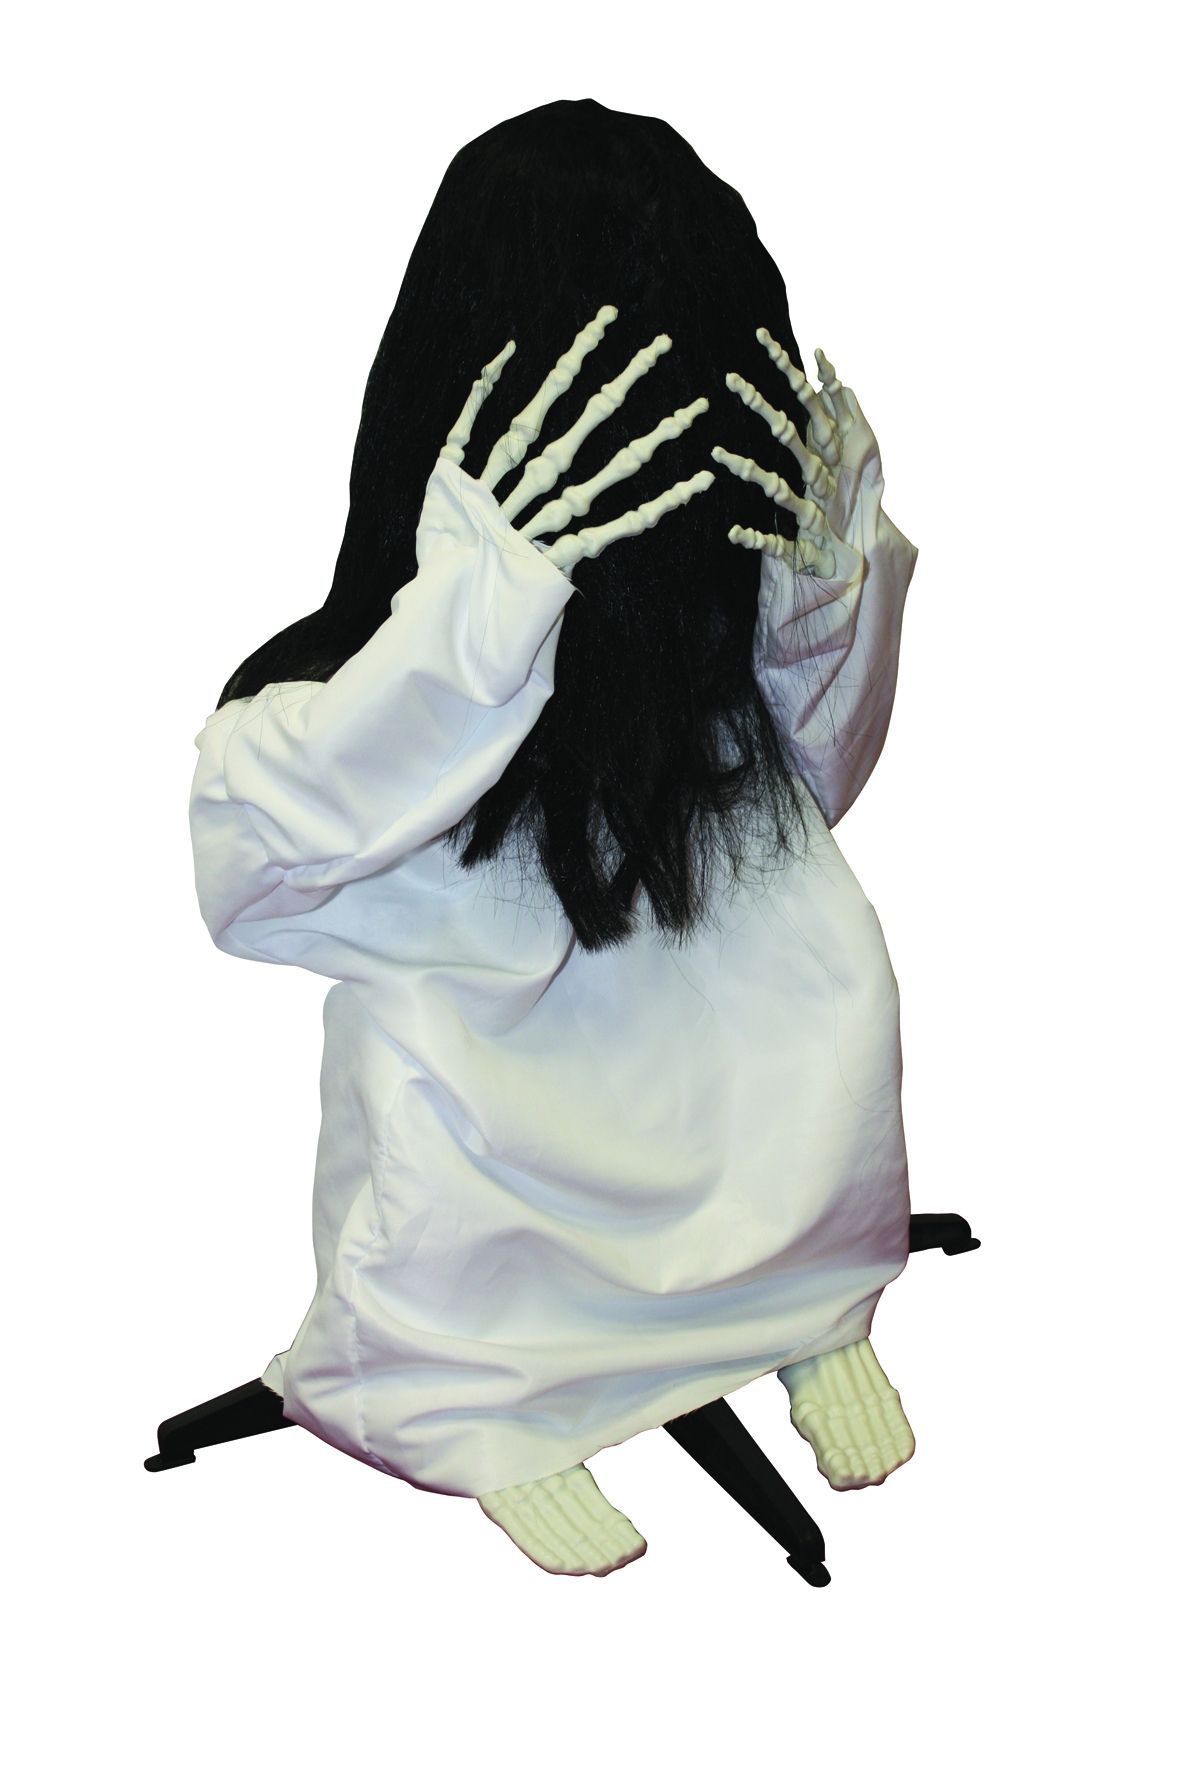 Spooky Crying Ghost Figure Halloween Decoration - 6568A